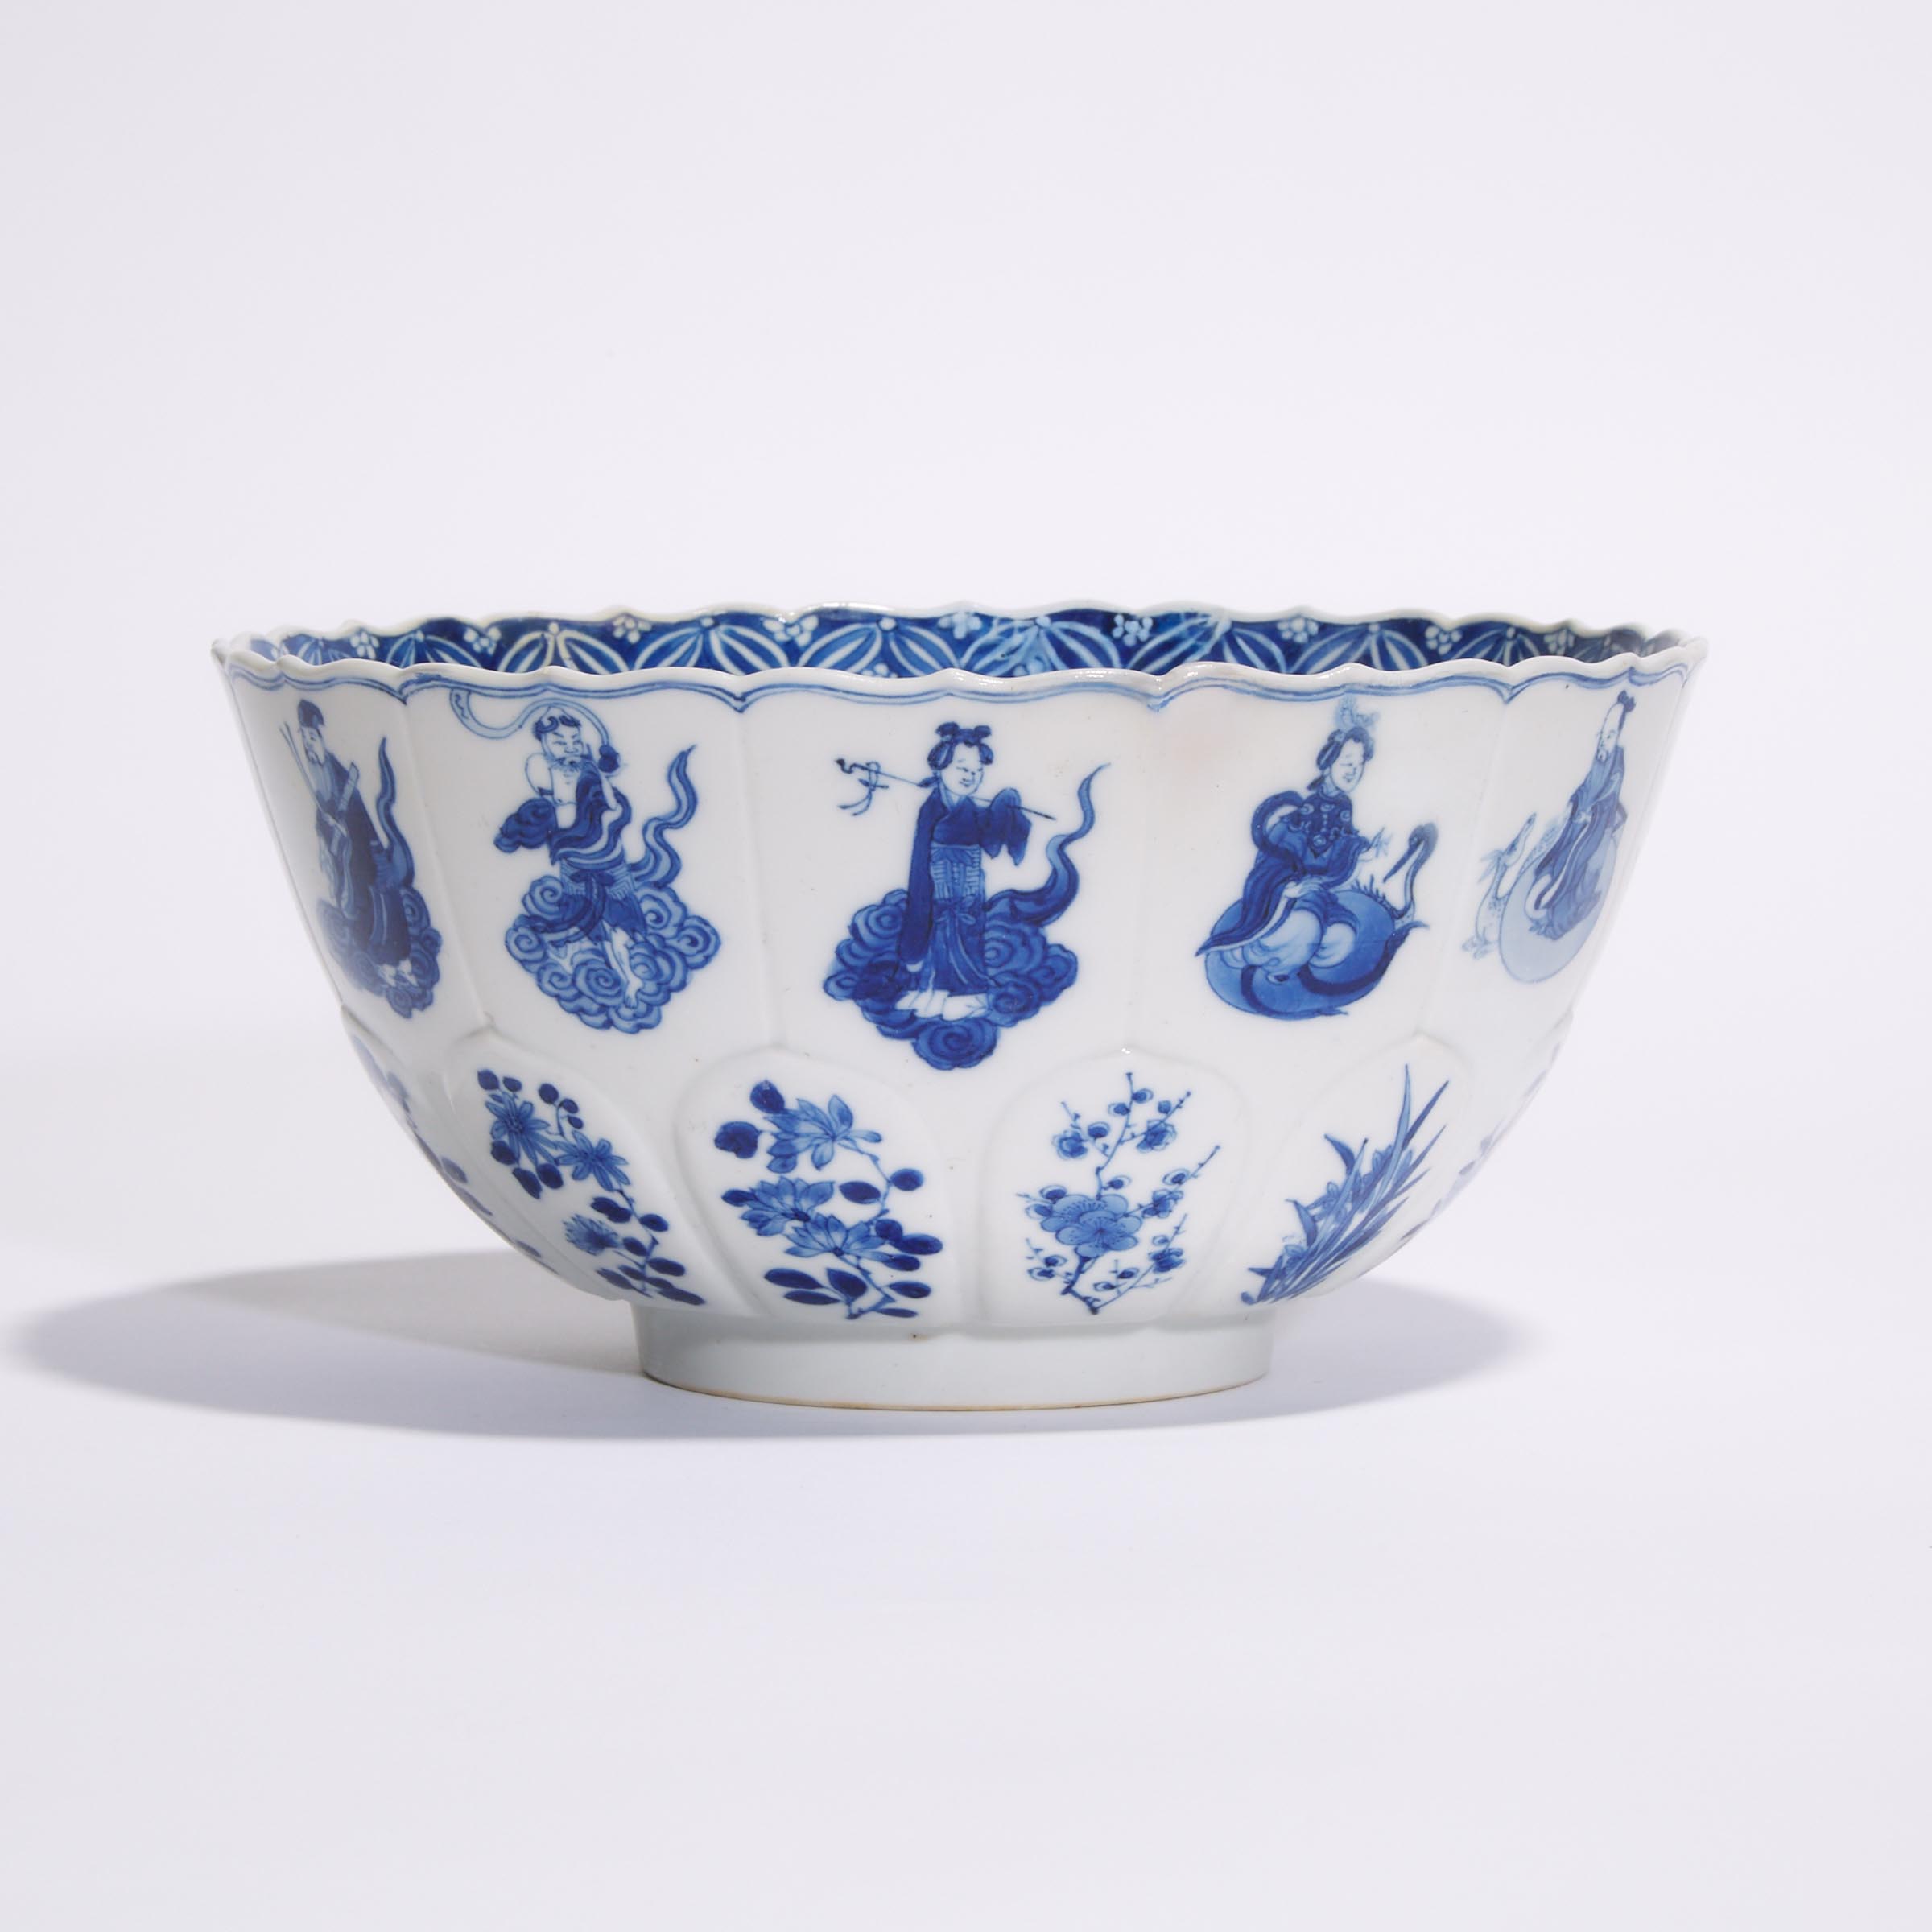 A Blue and White Barbed-Rim 'Immortals' Bowl, Kangxi Period (1662-1722)